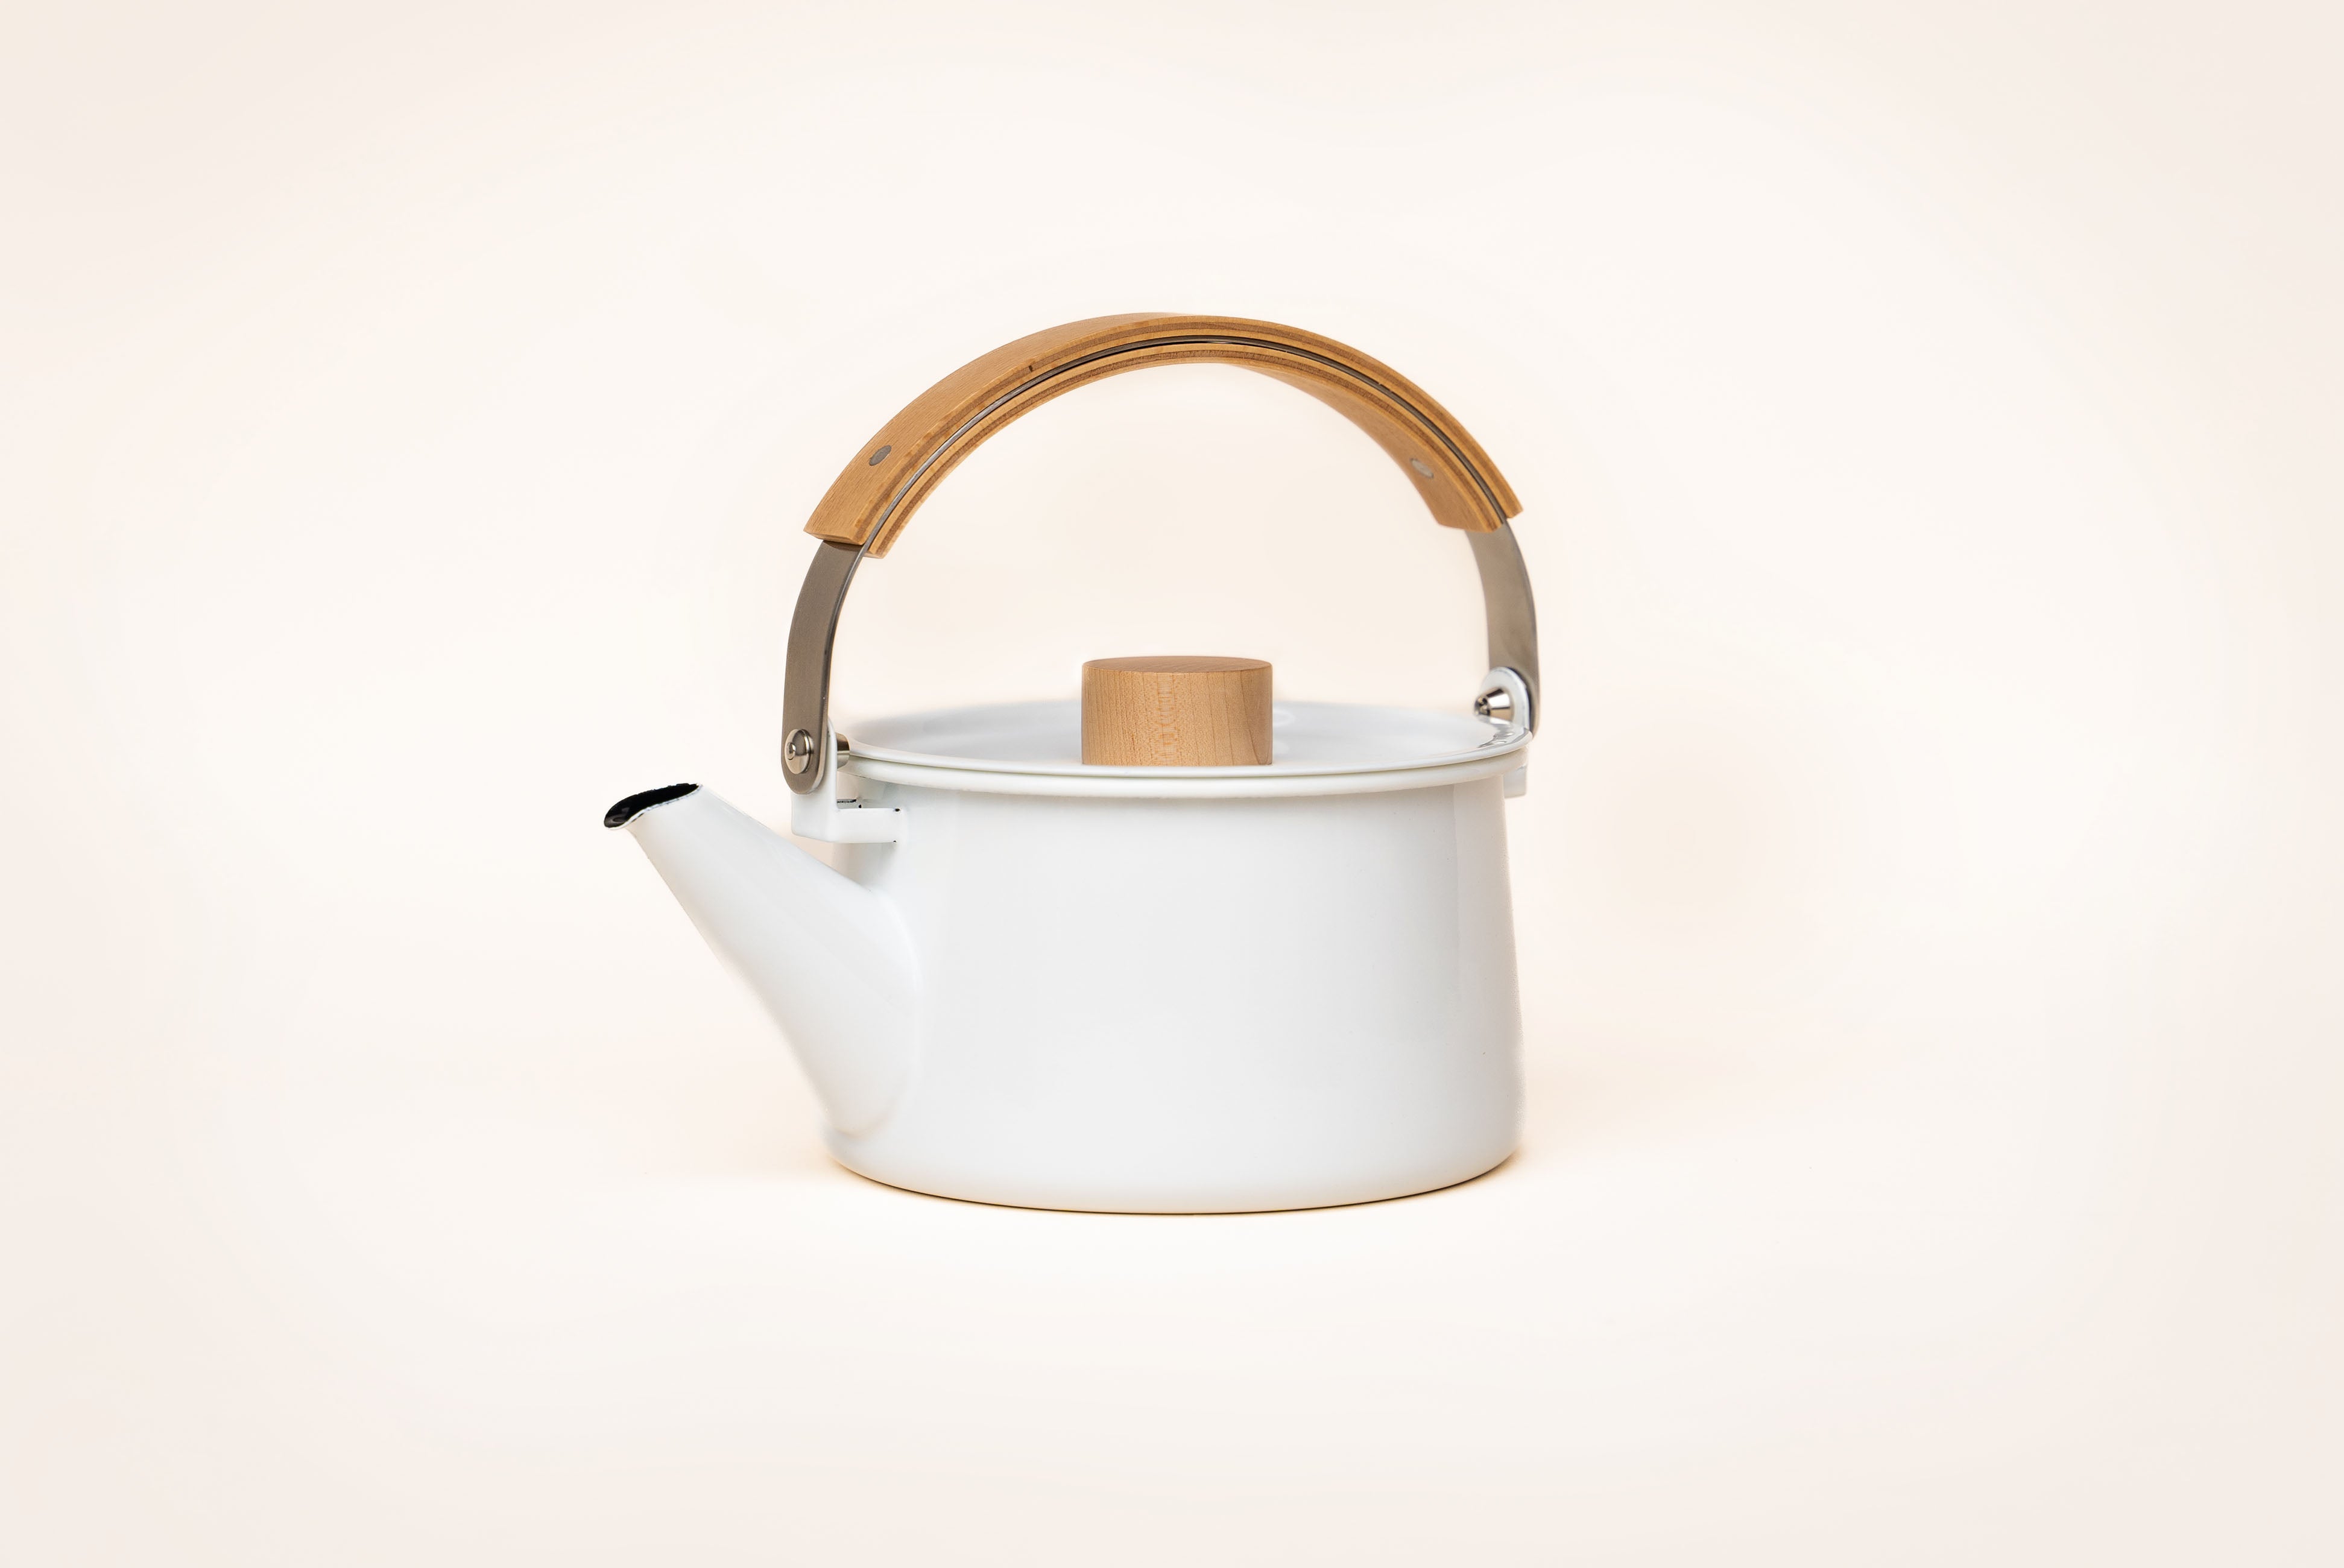 Japanese Tea Kettle with Maple Handle | product detail